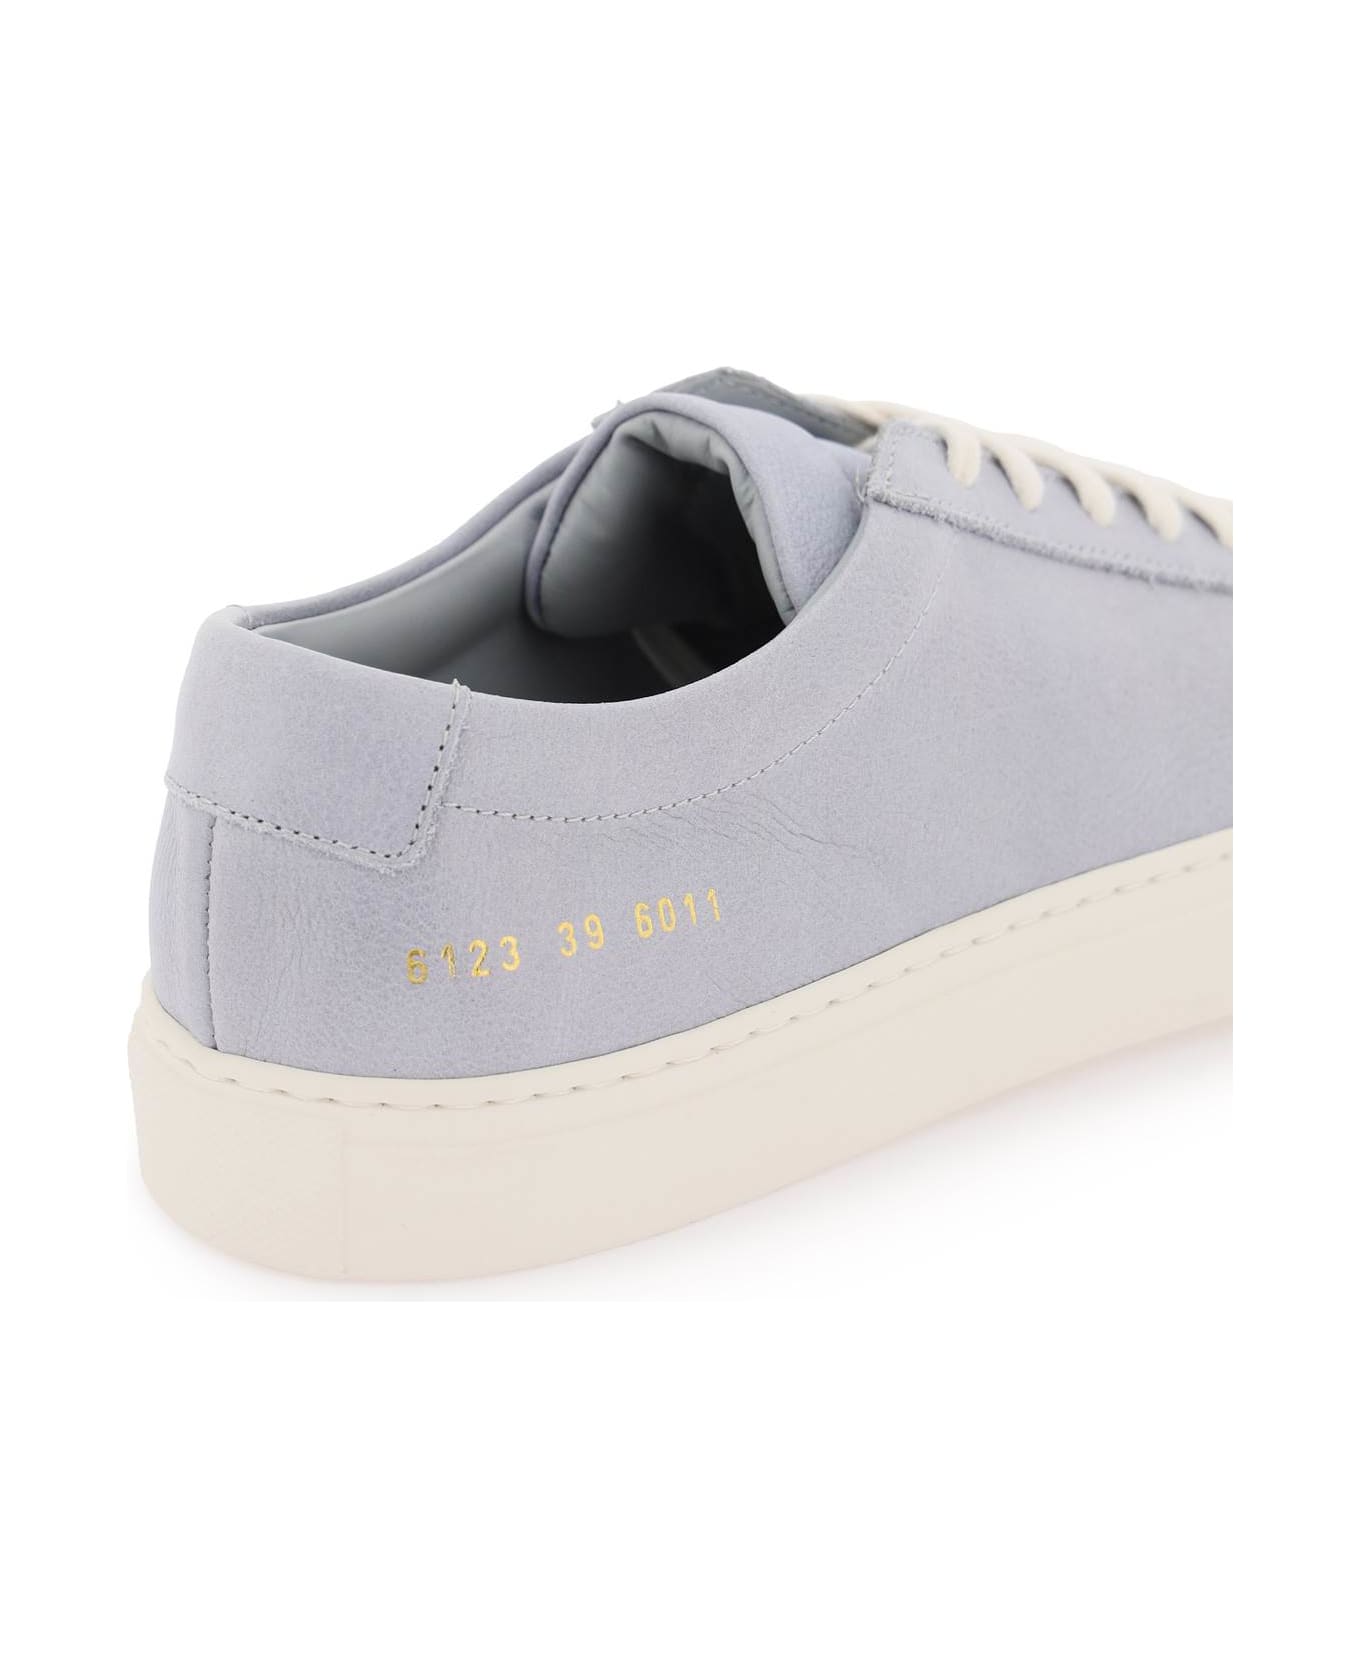 Common Projects Original Achilles Leather Sneakers - POWDER BLUE (Light blue) スニーカー